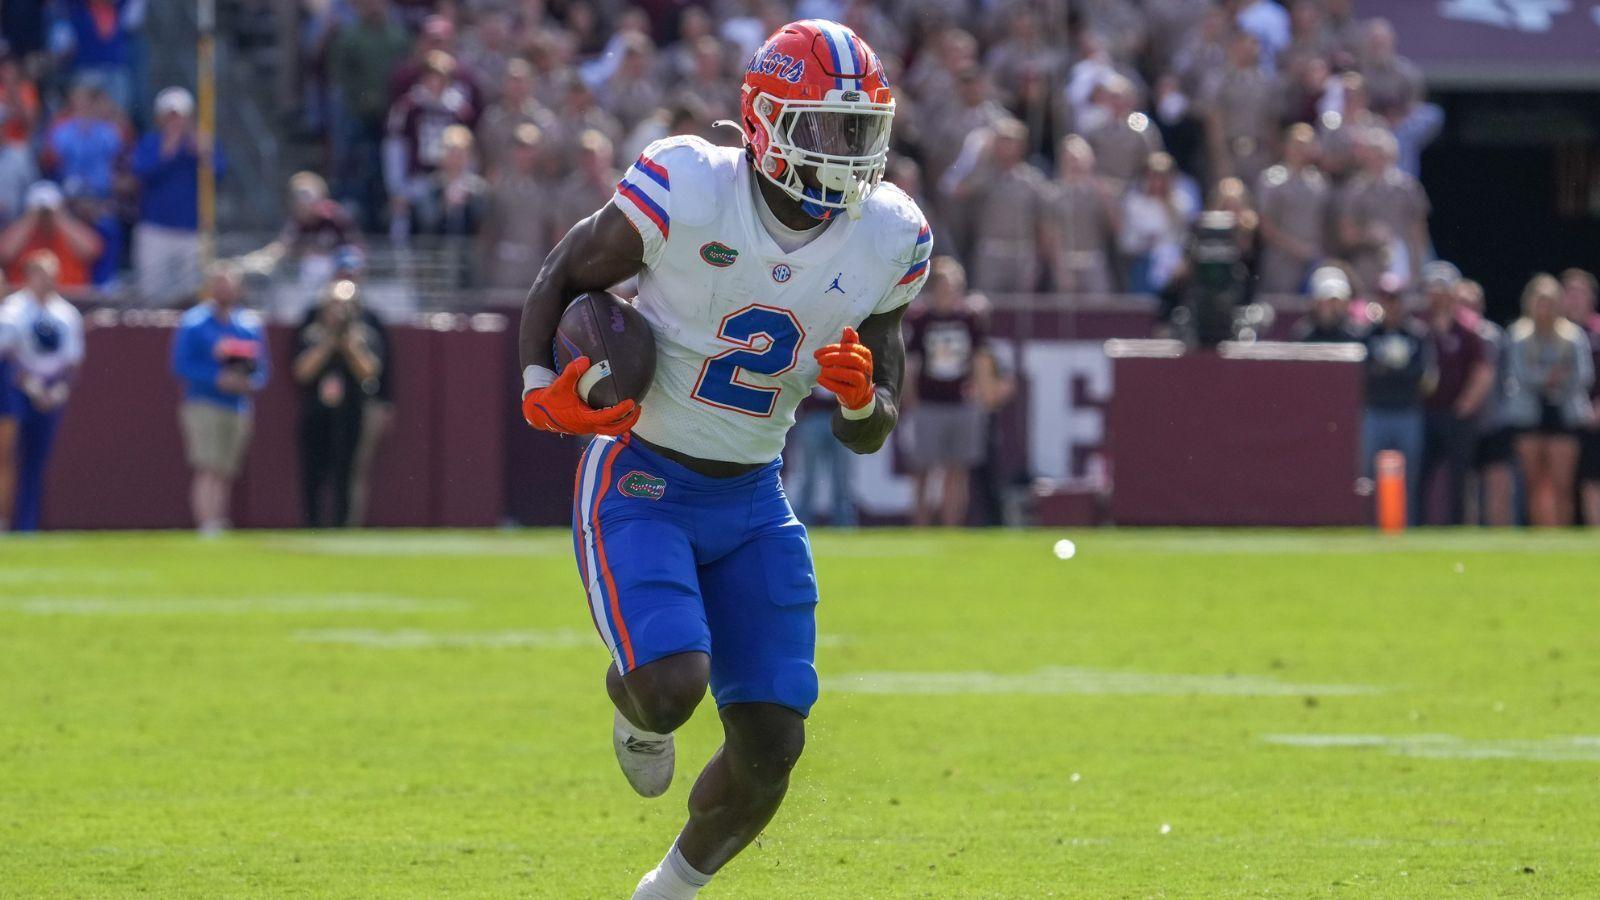 Gators Victorious in Final Game at No. 6 Tennessee - Florida Gators